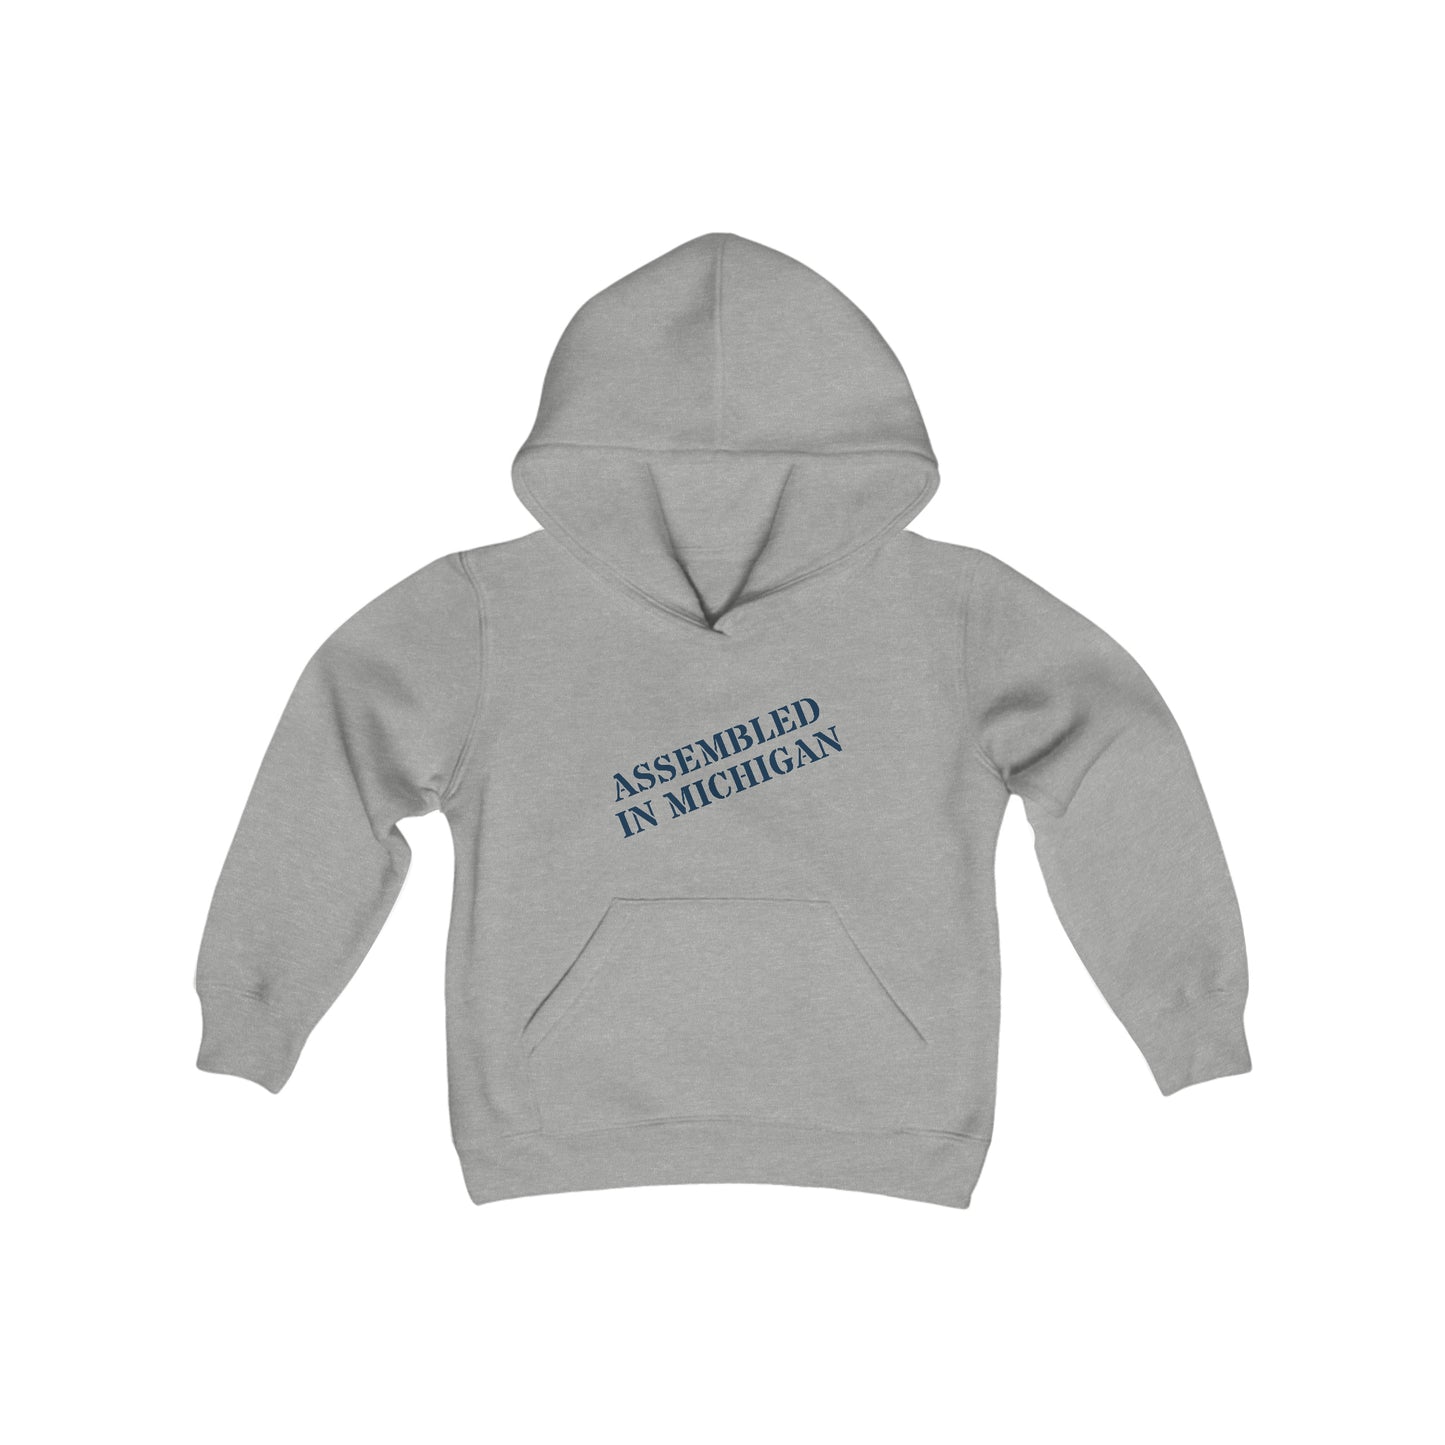 'Assembled in Michigan' Hoodie | Unisex Youth